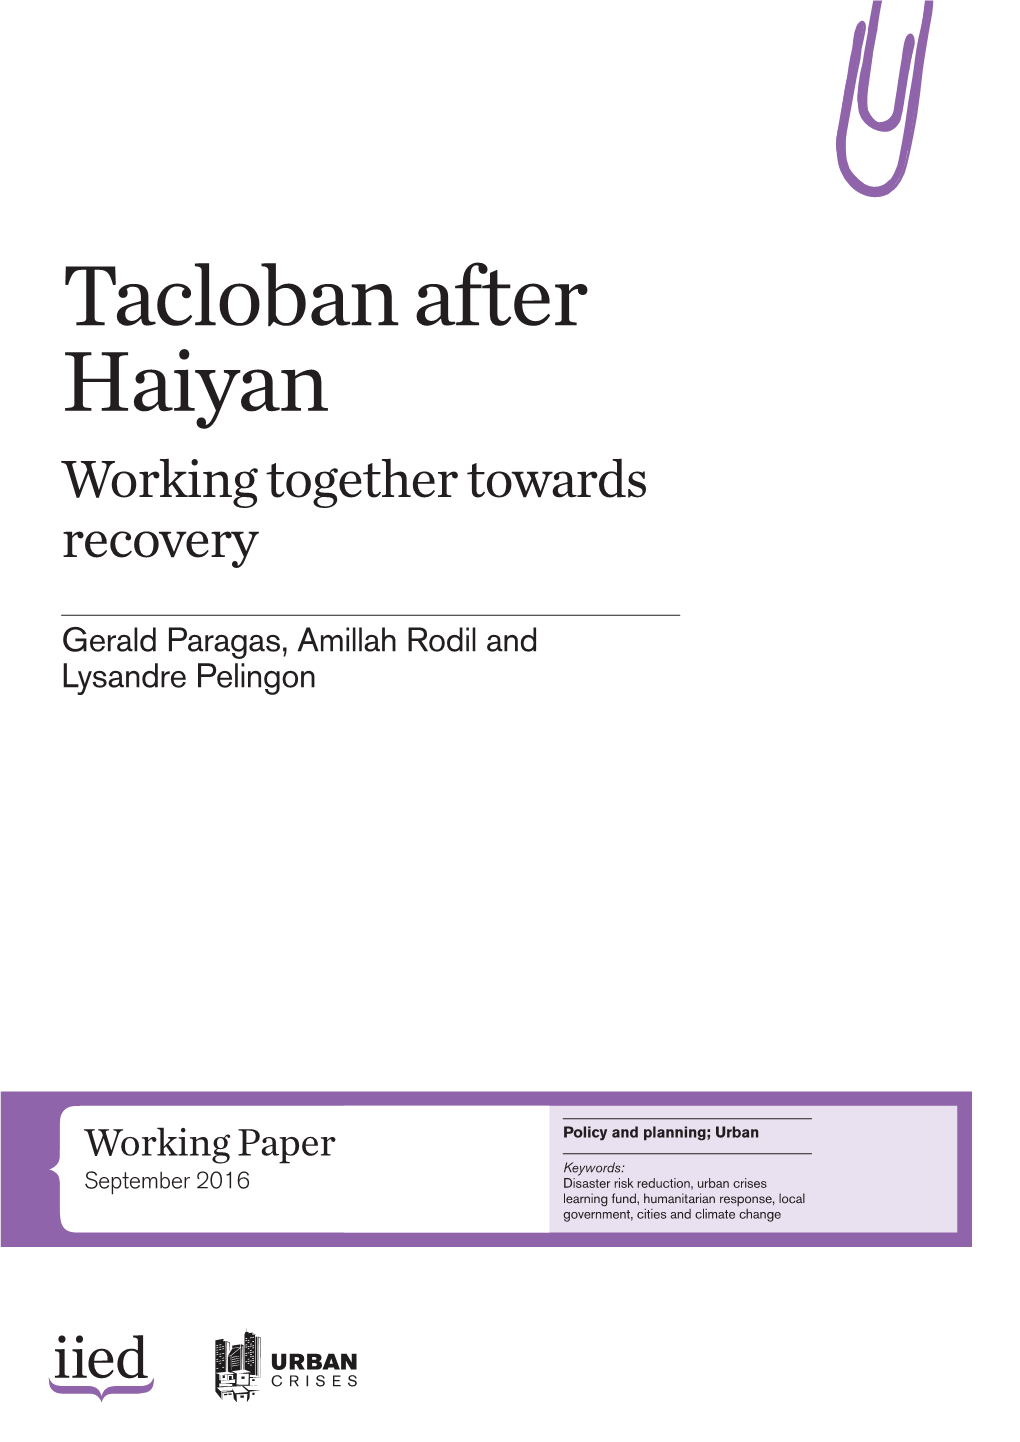 Tacloban After Haiyan Working Together Towards Recovery